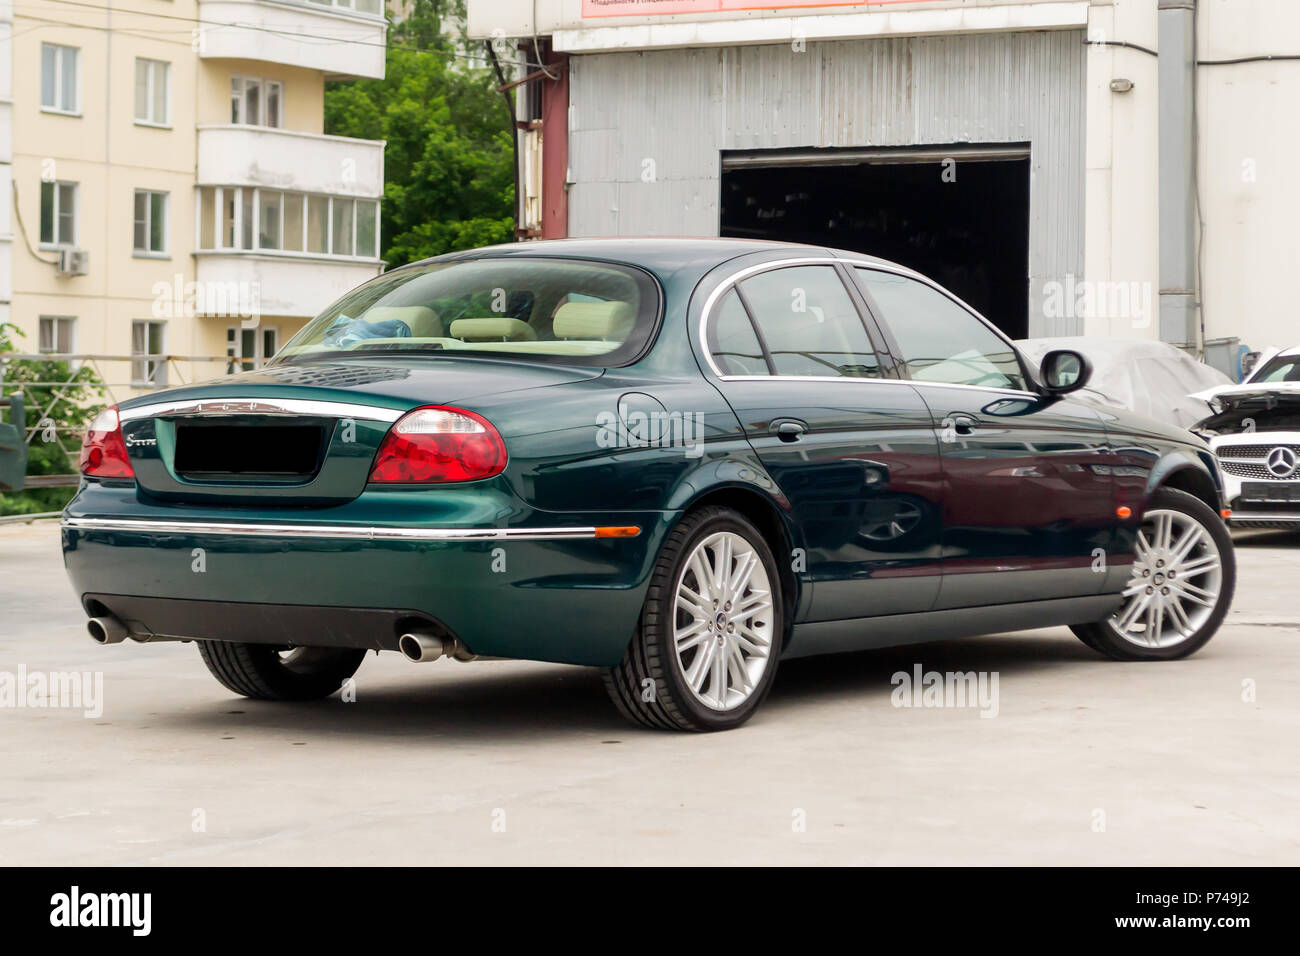 Novosibirsk, Russia - 06.28.2018: Brightly green Jaguar S-type 2007 rear  view with light beige interior in excellent condition in a parking space  amon Stock Photo - Alamy